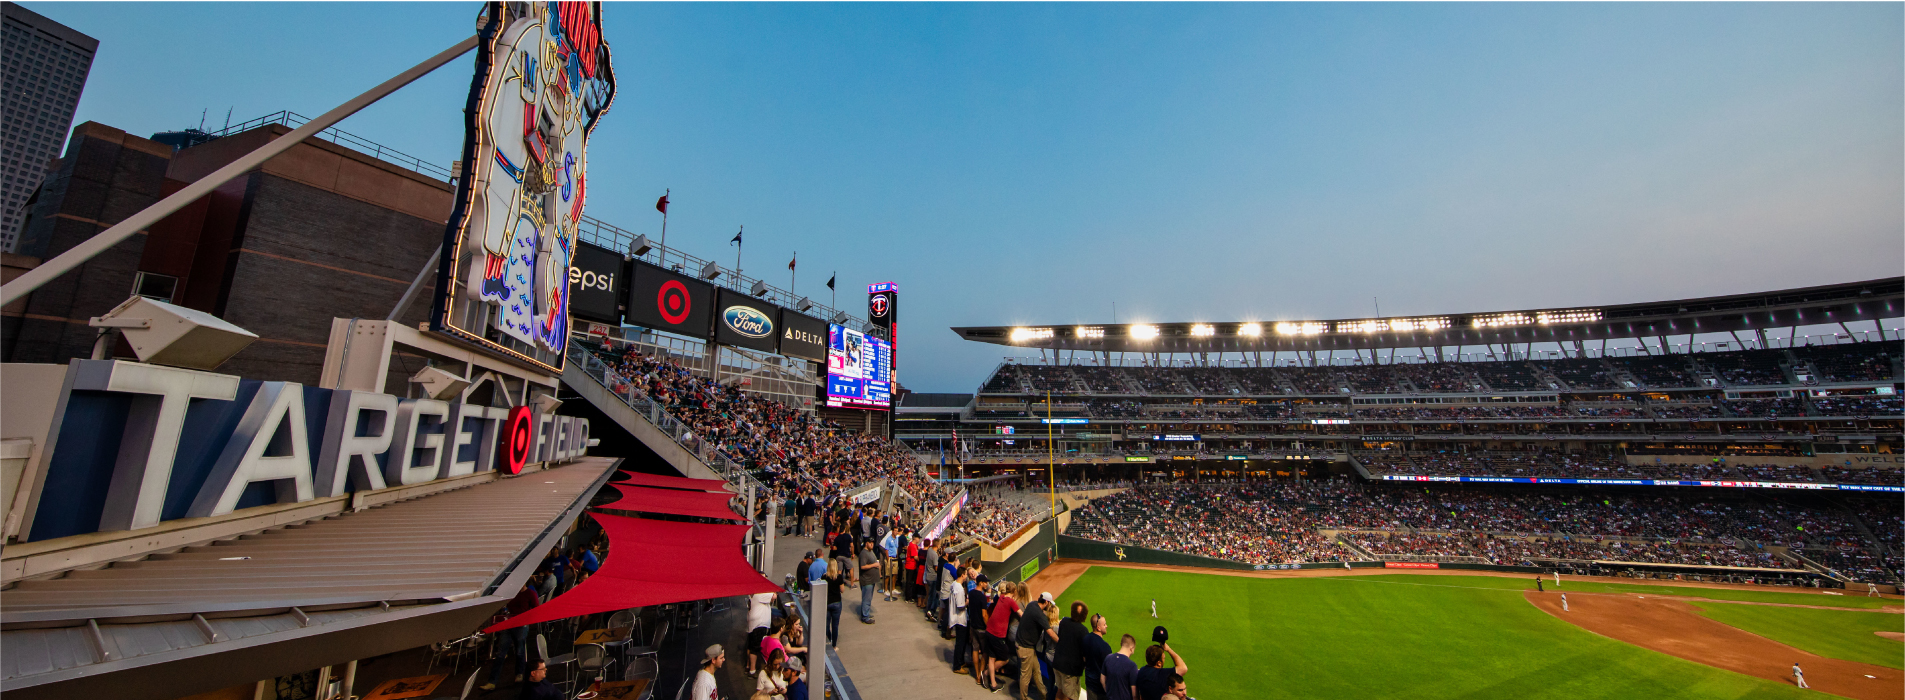 Target Field stadium with fans in the stand during a baseball game